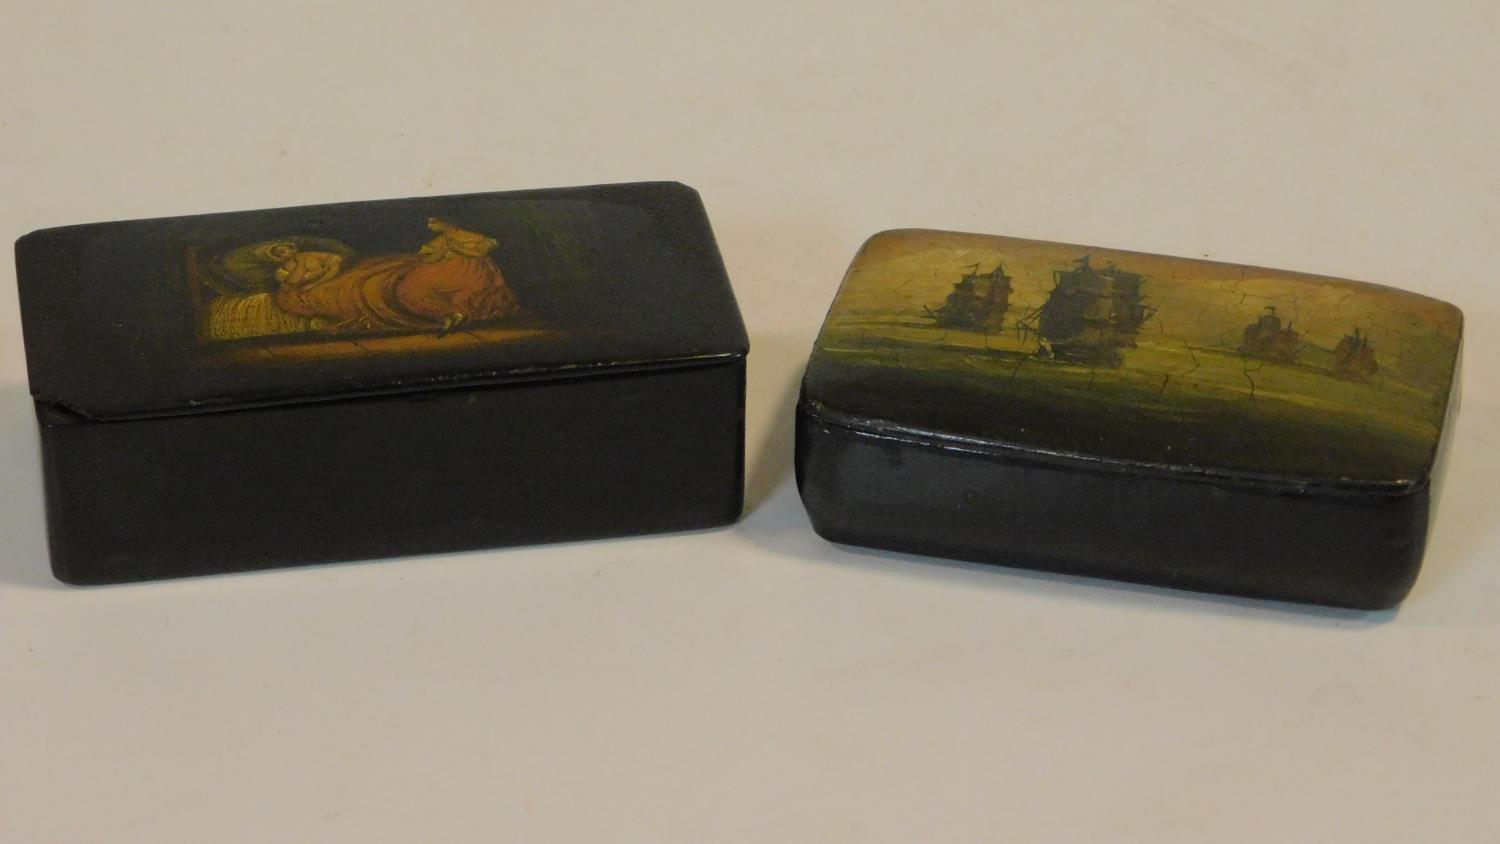 Two 19th century paper mache boxes with decorative hand painted lids, one contains 3 old soveriegn